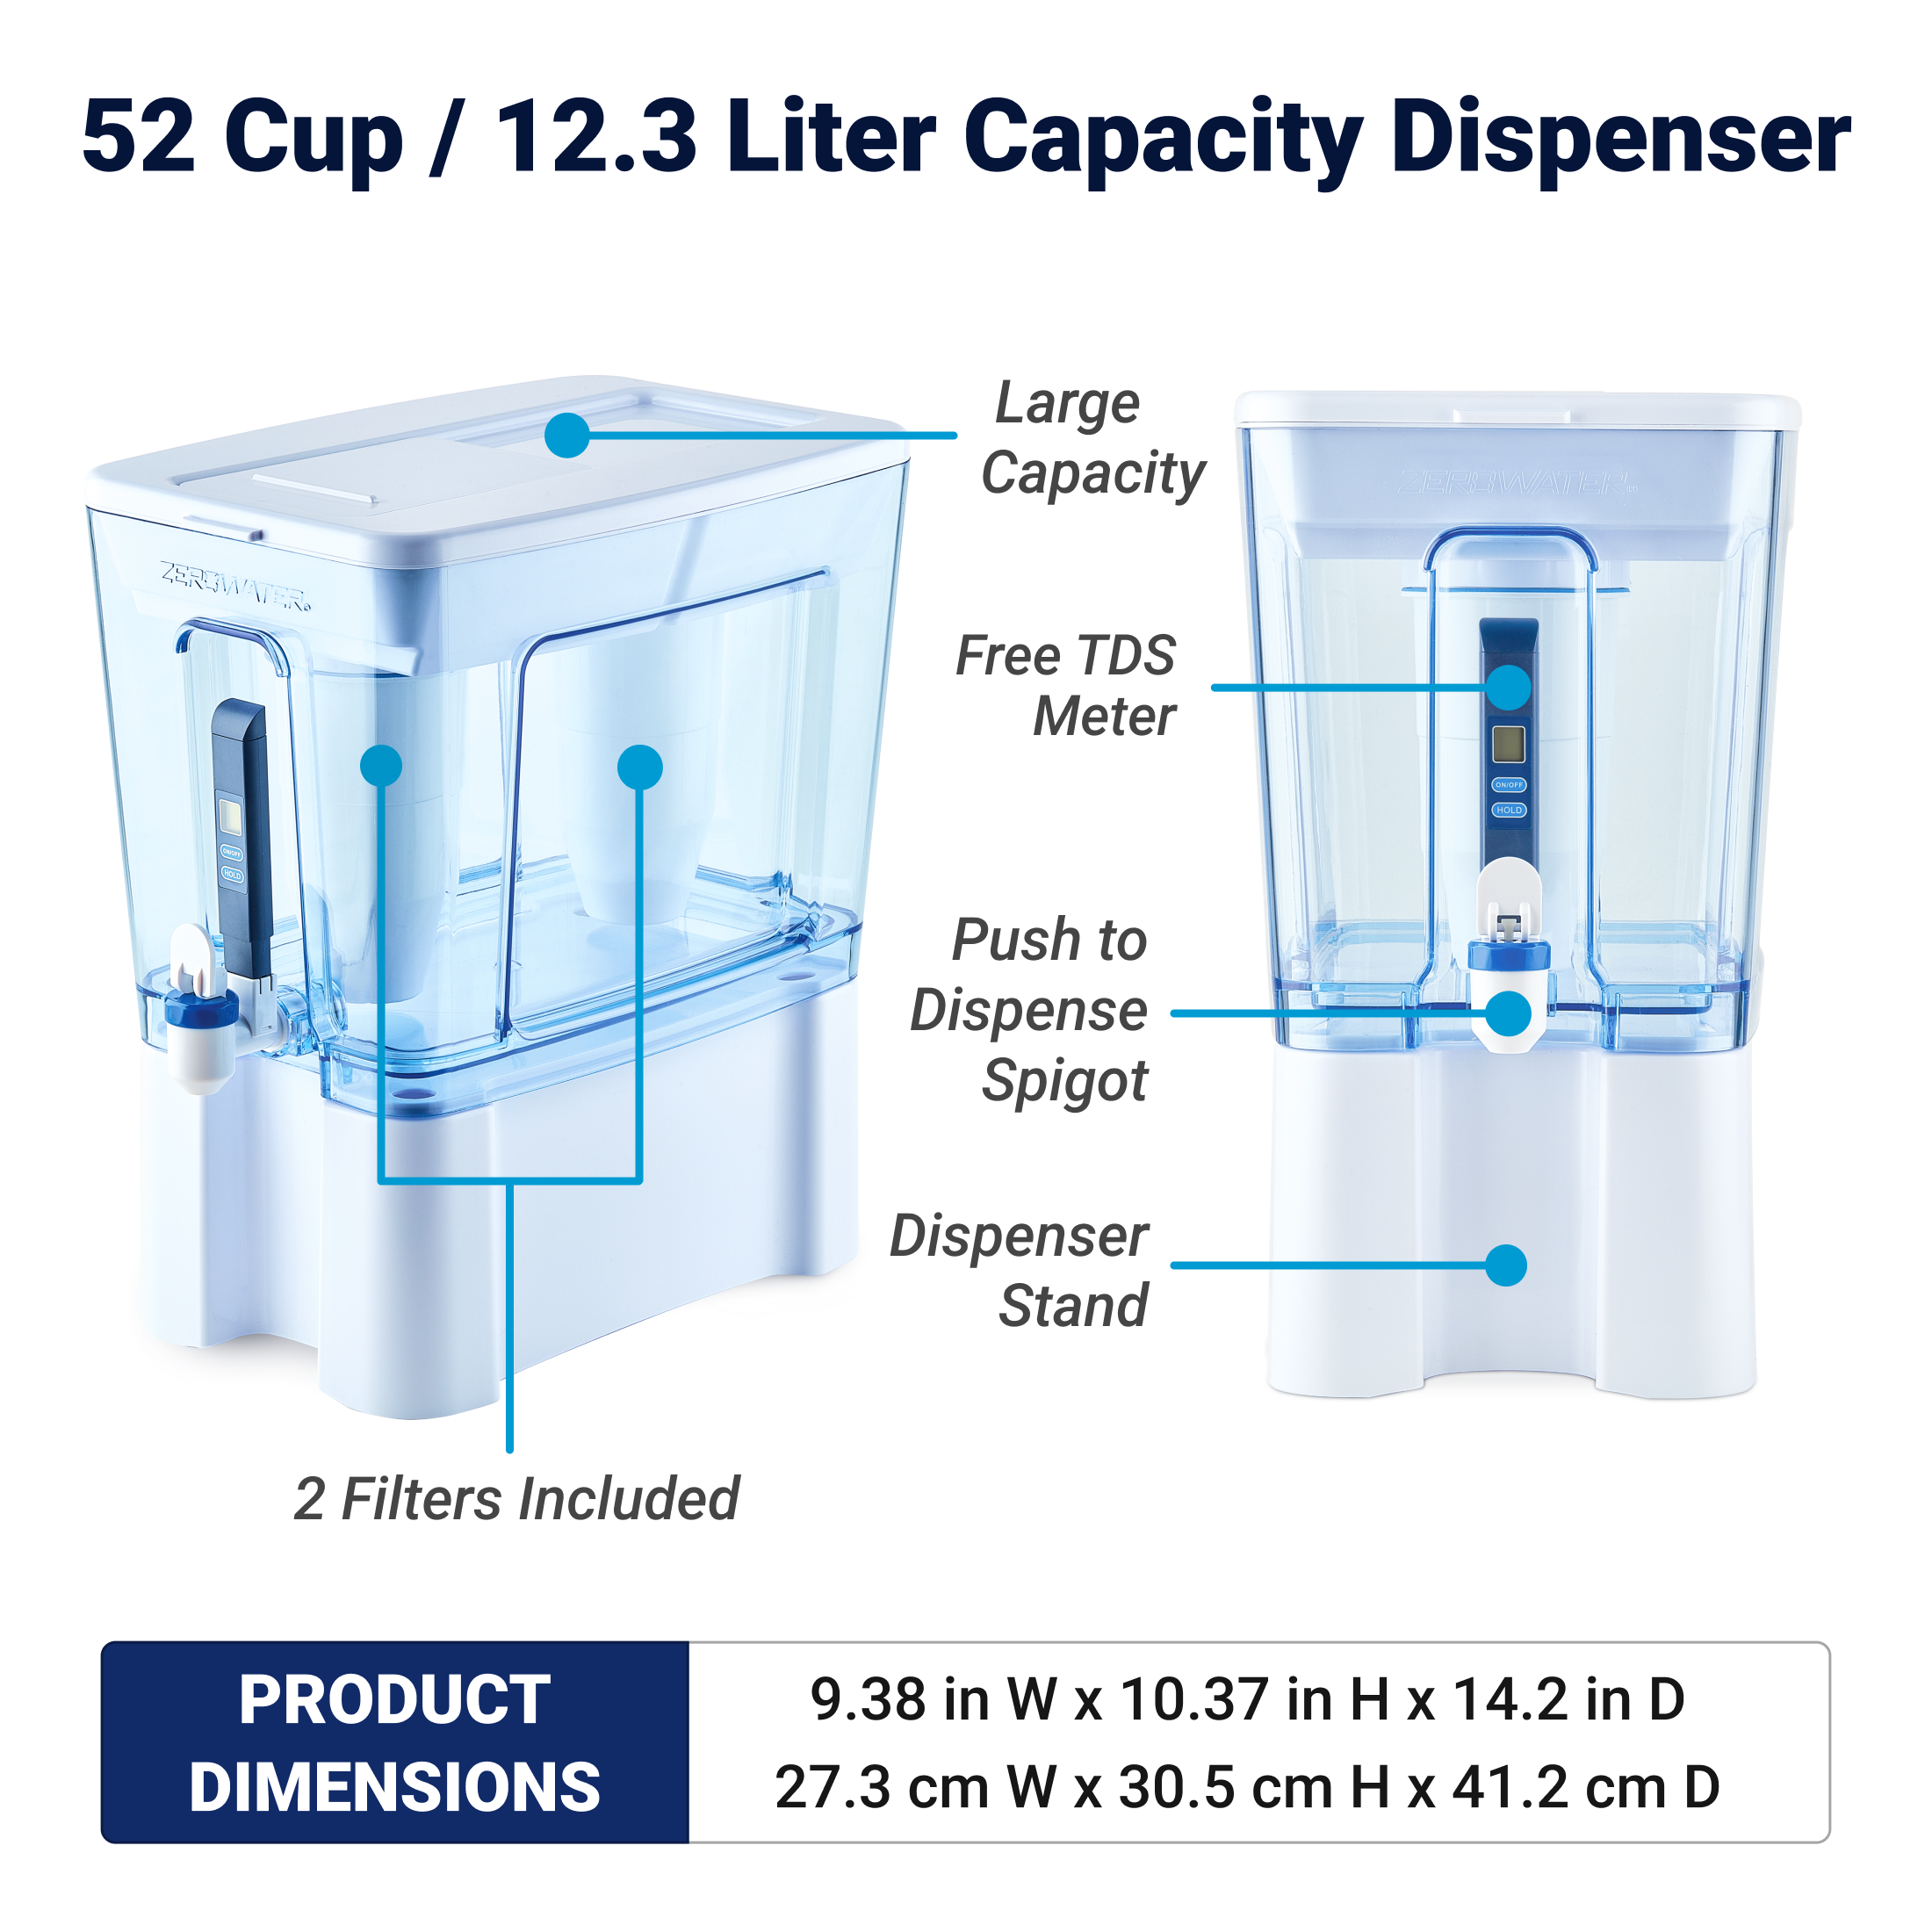 52 cup 12.3 liter capacity dispenser with product dimensions